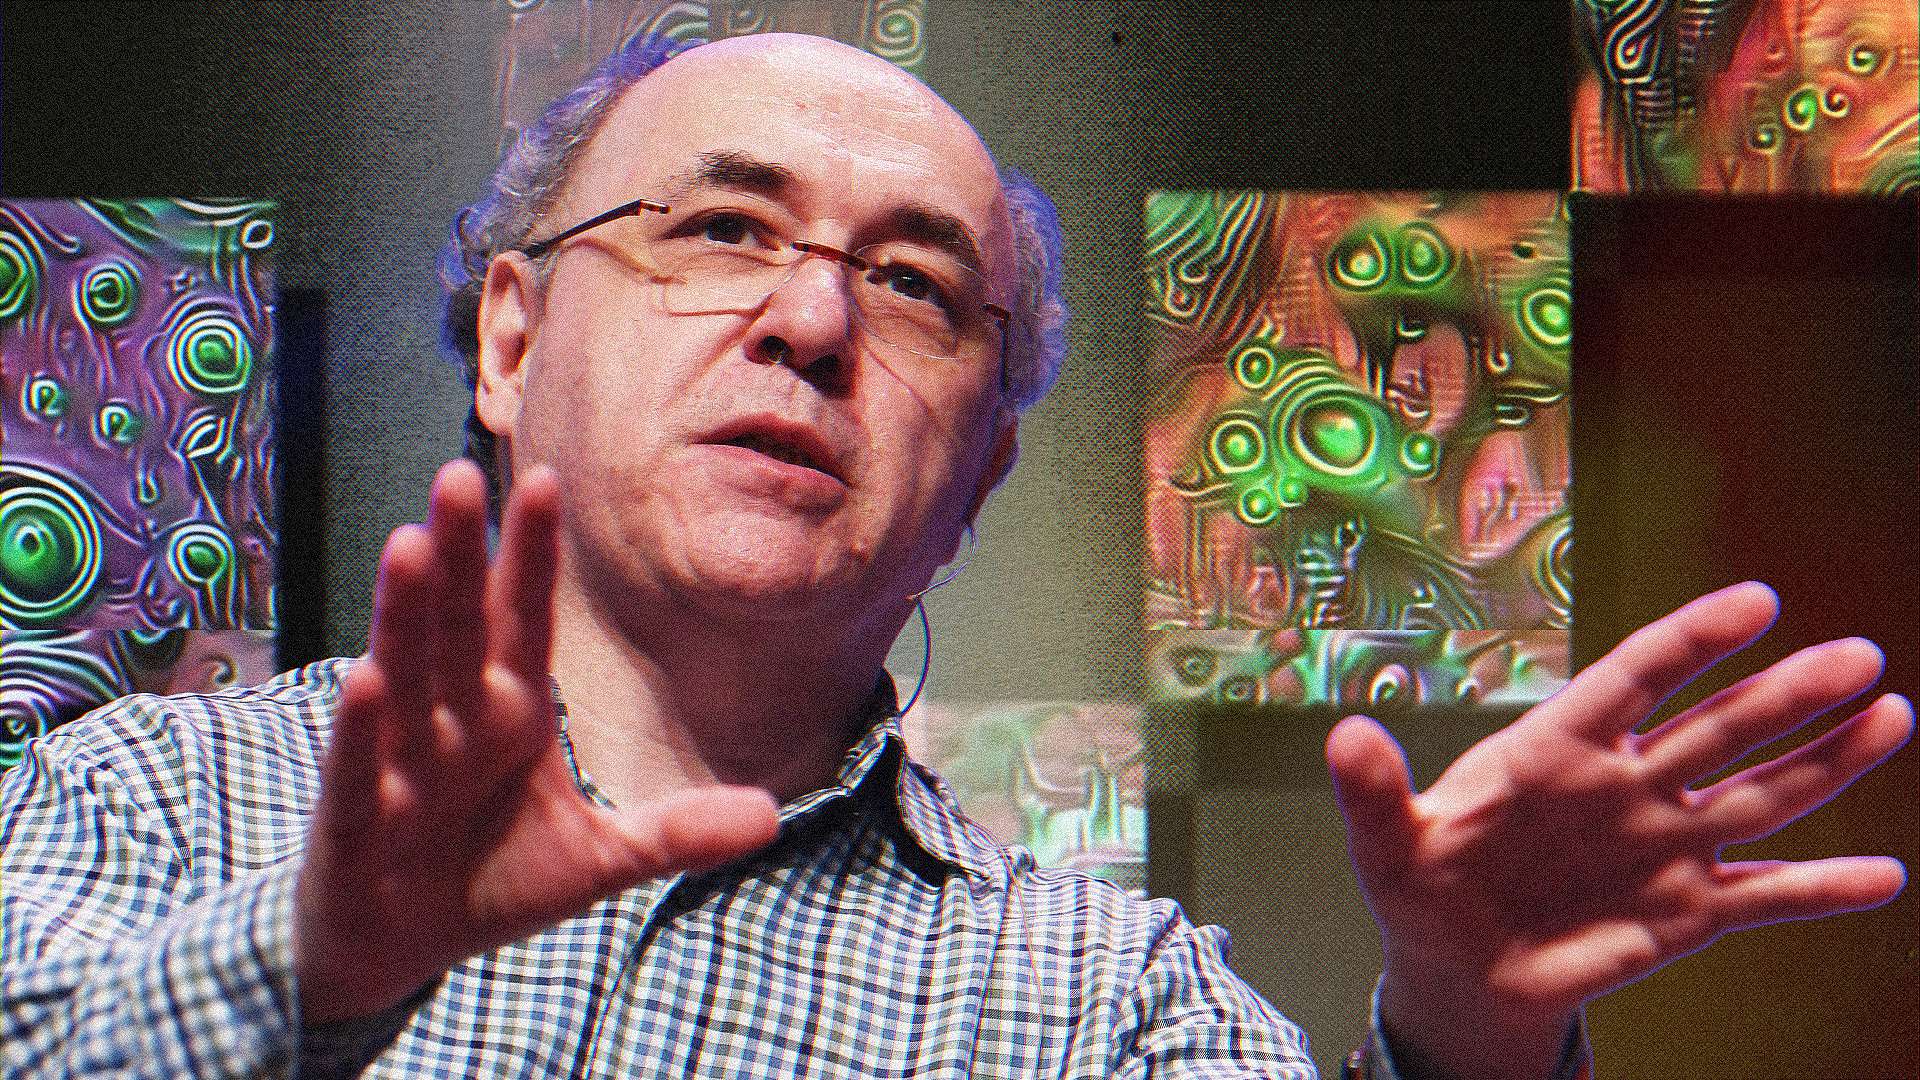 Stephen Wolfram is, strictly speaking, a high school and college dropout: He left both Eton and Oxford early, citing boredom. At 20, he received his d